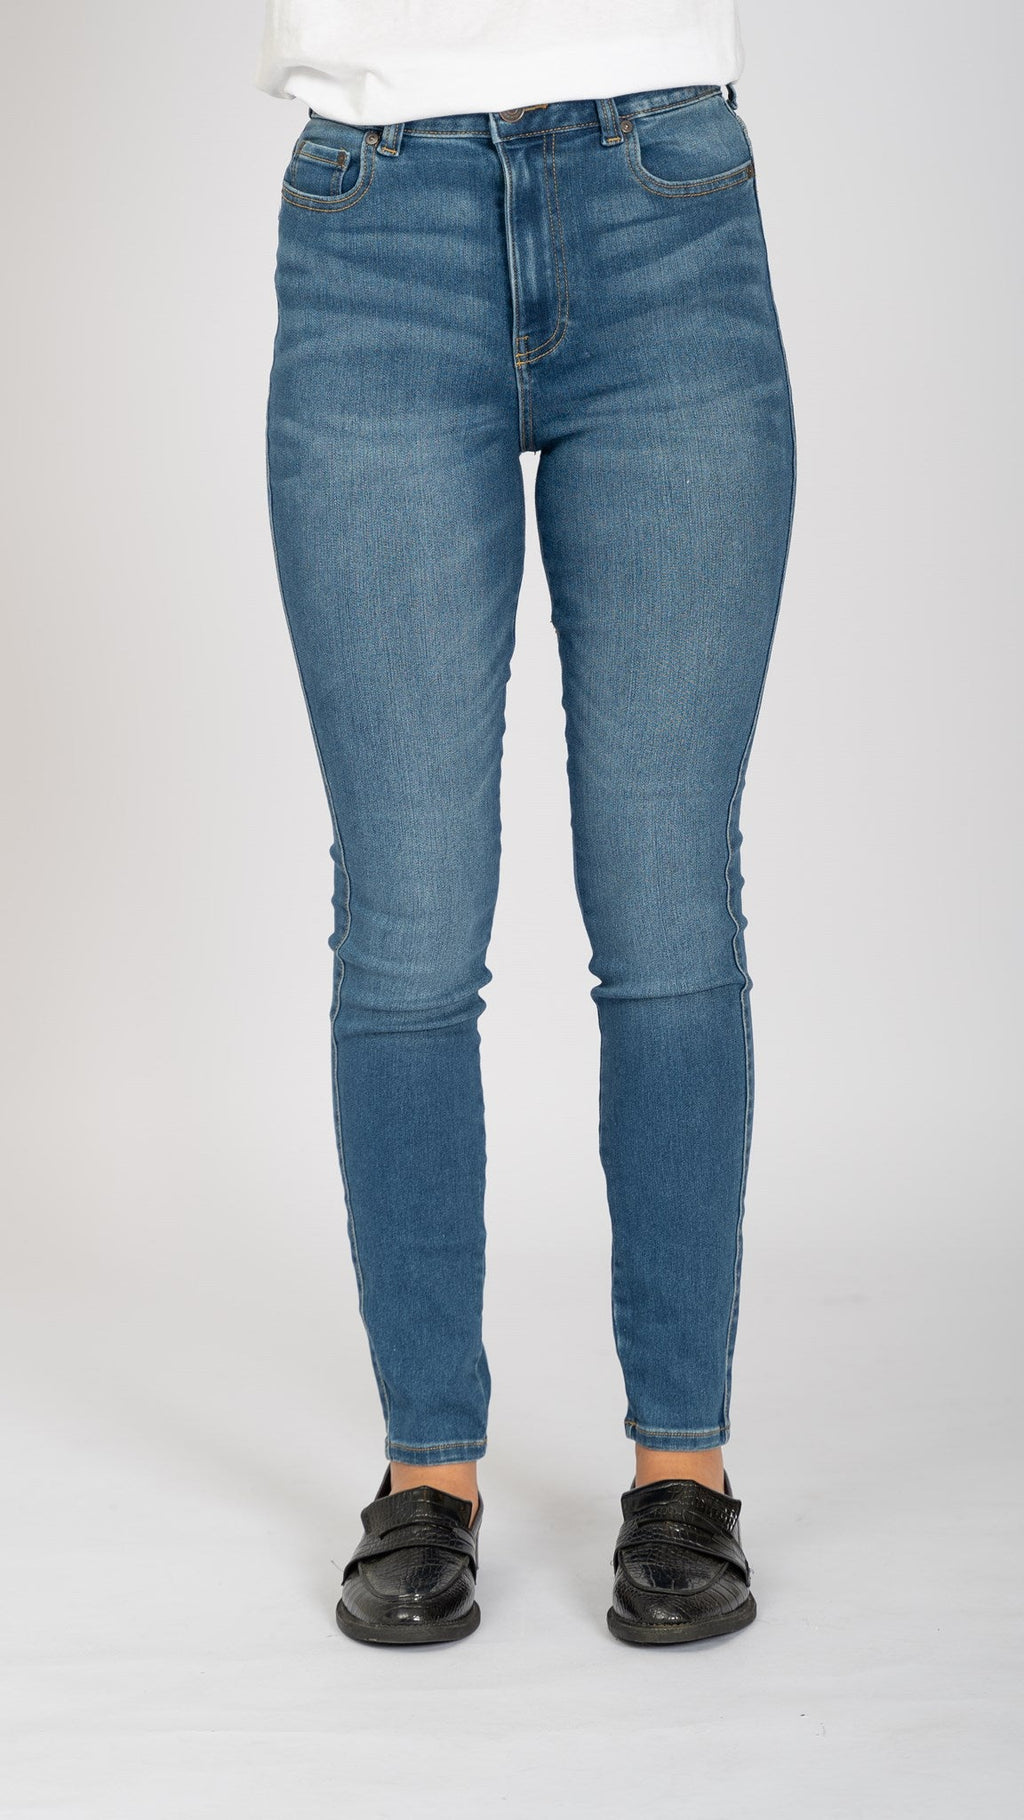 The Original Performance Skinny Jeans ™ ️ Mujeres - Paquete (3 pcs).